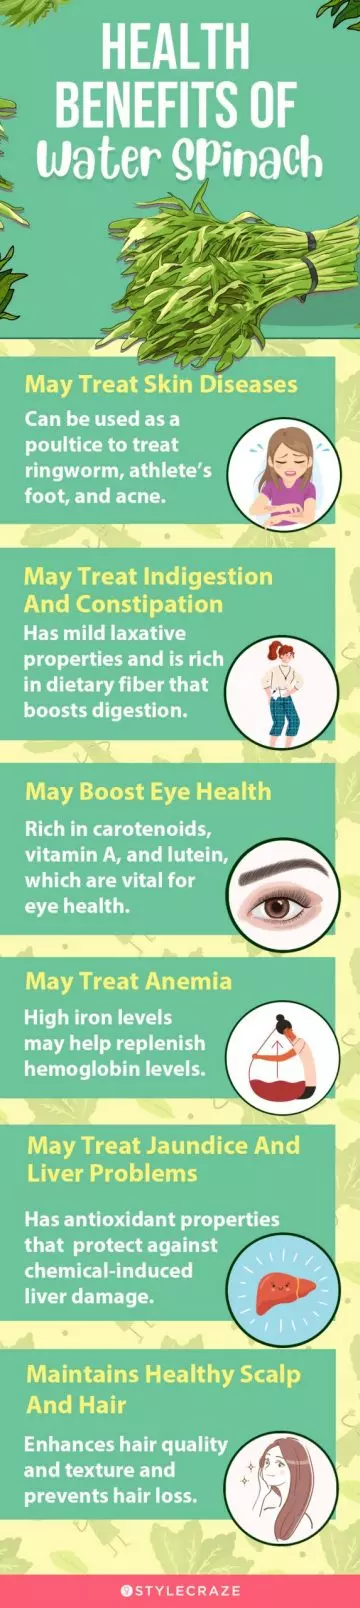 health benefits of water spinach (infographic)